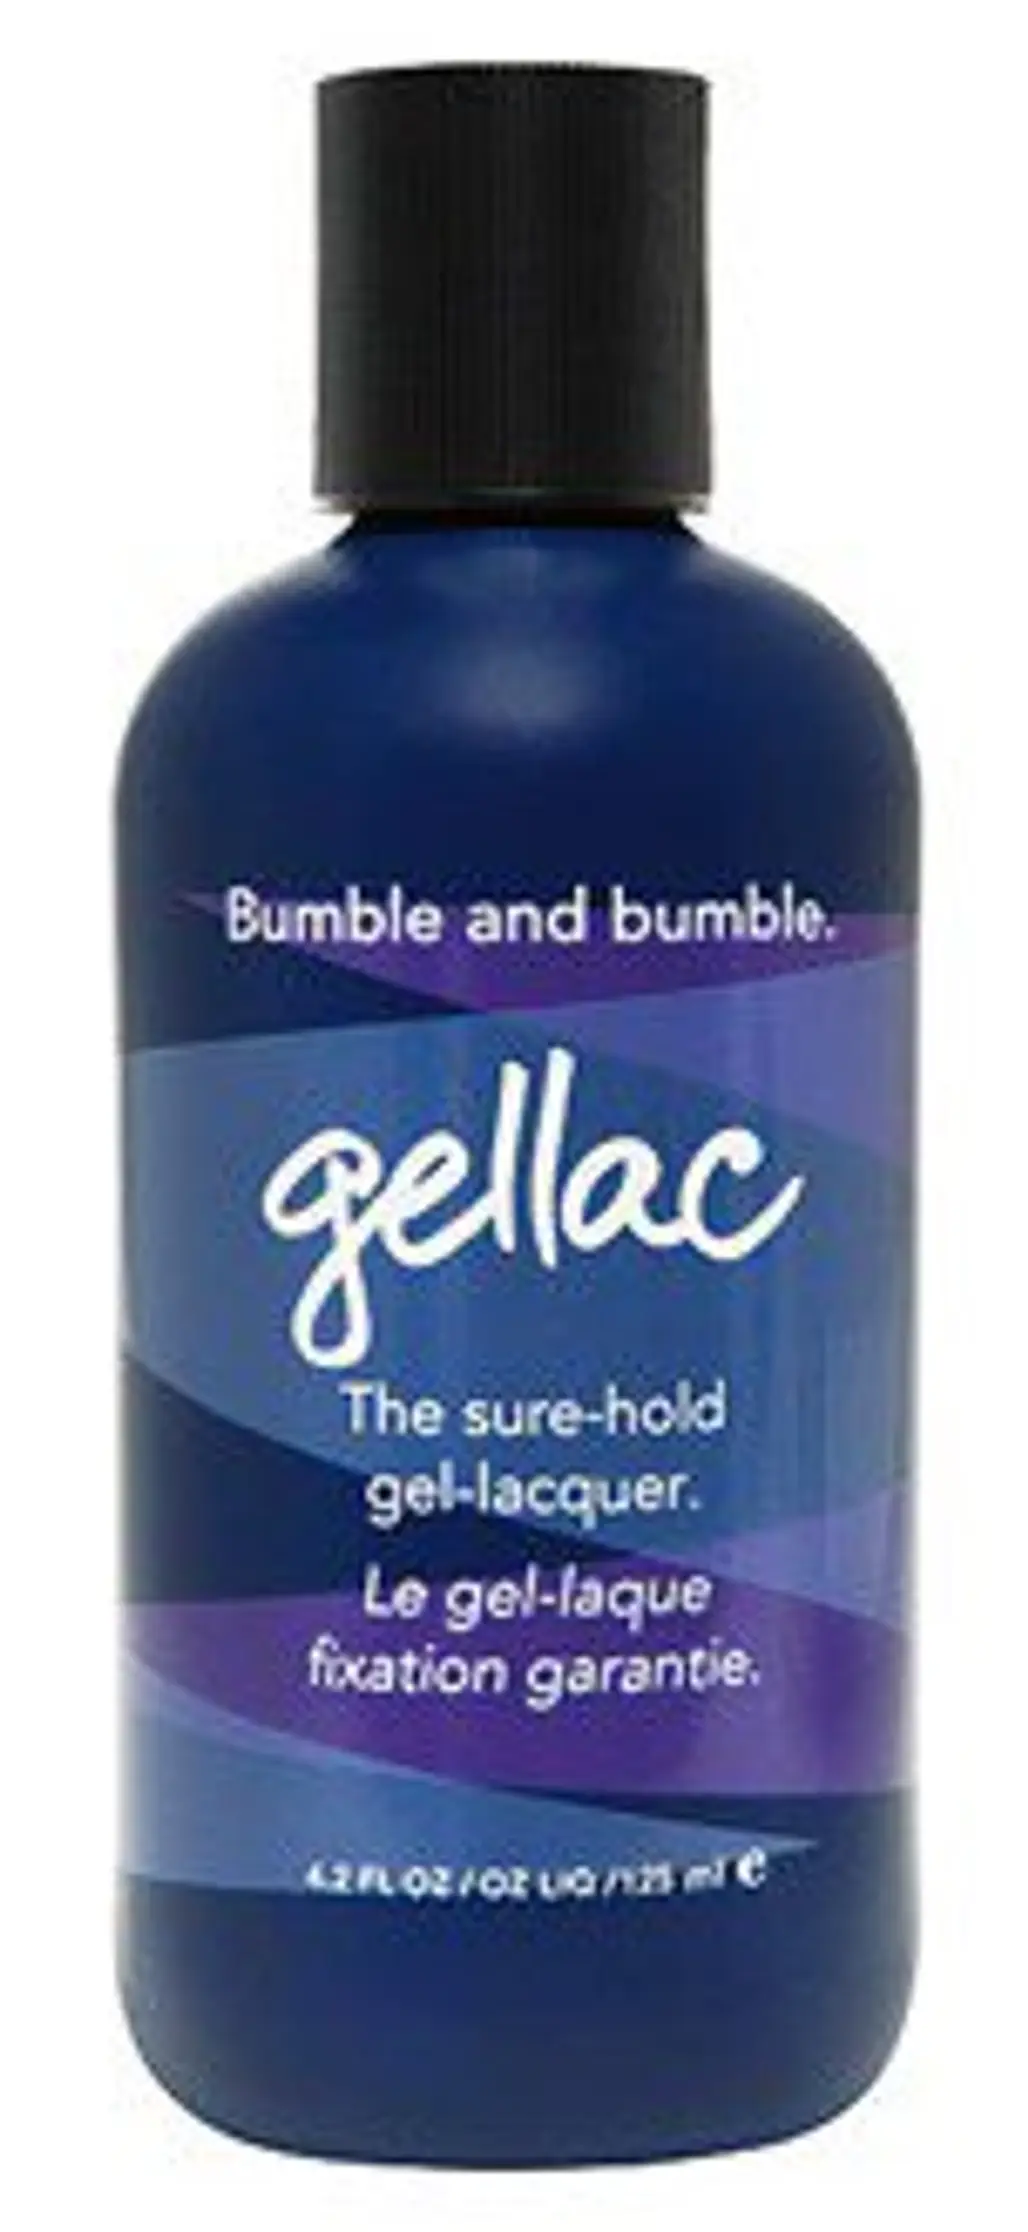 Gellac by Bumble and Bumble